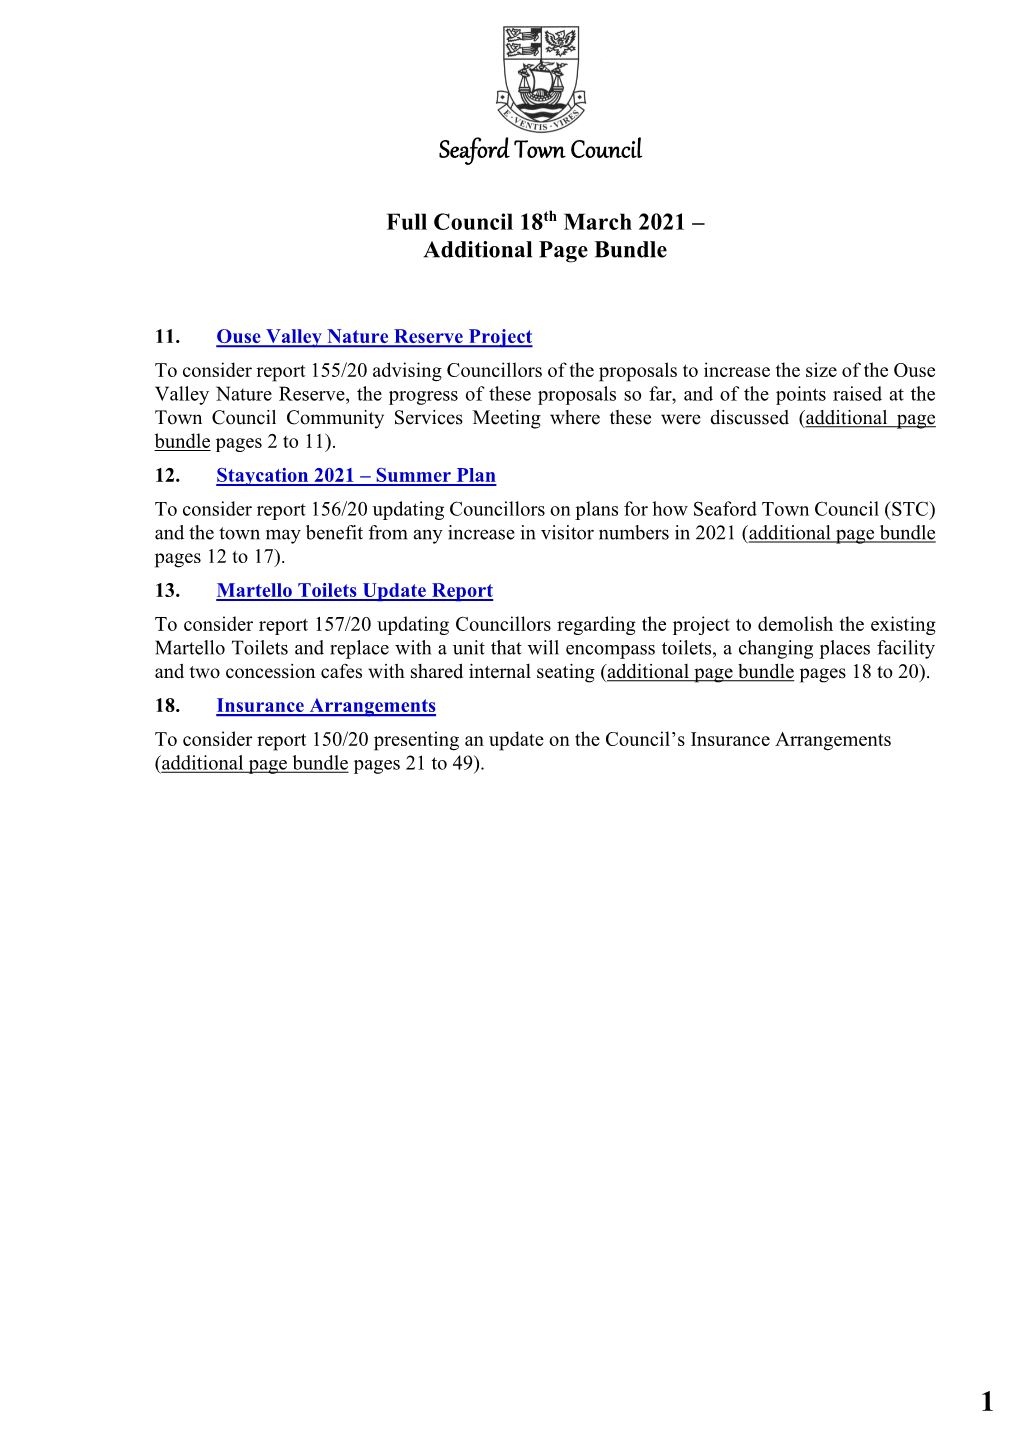 Full Council 18Th March 2021 – Additional Page Bundle